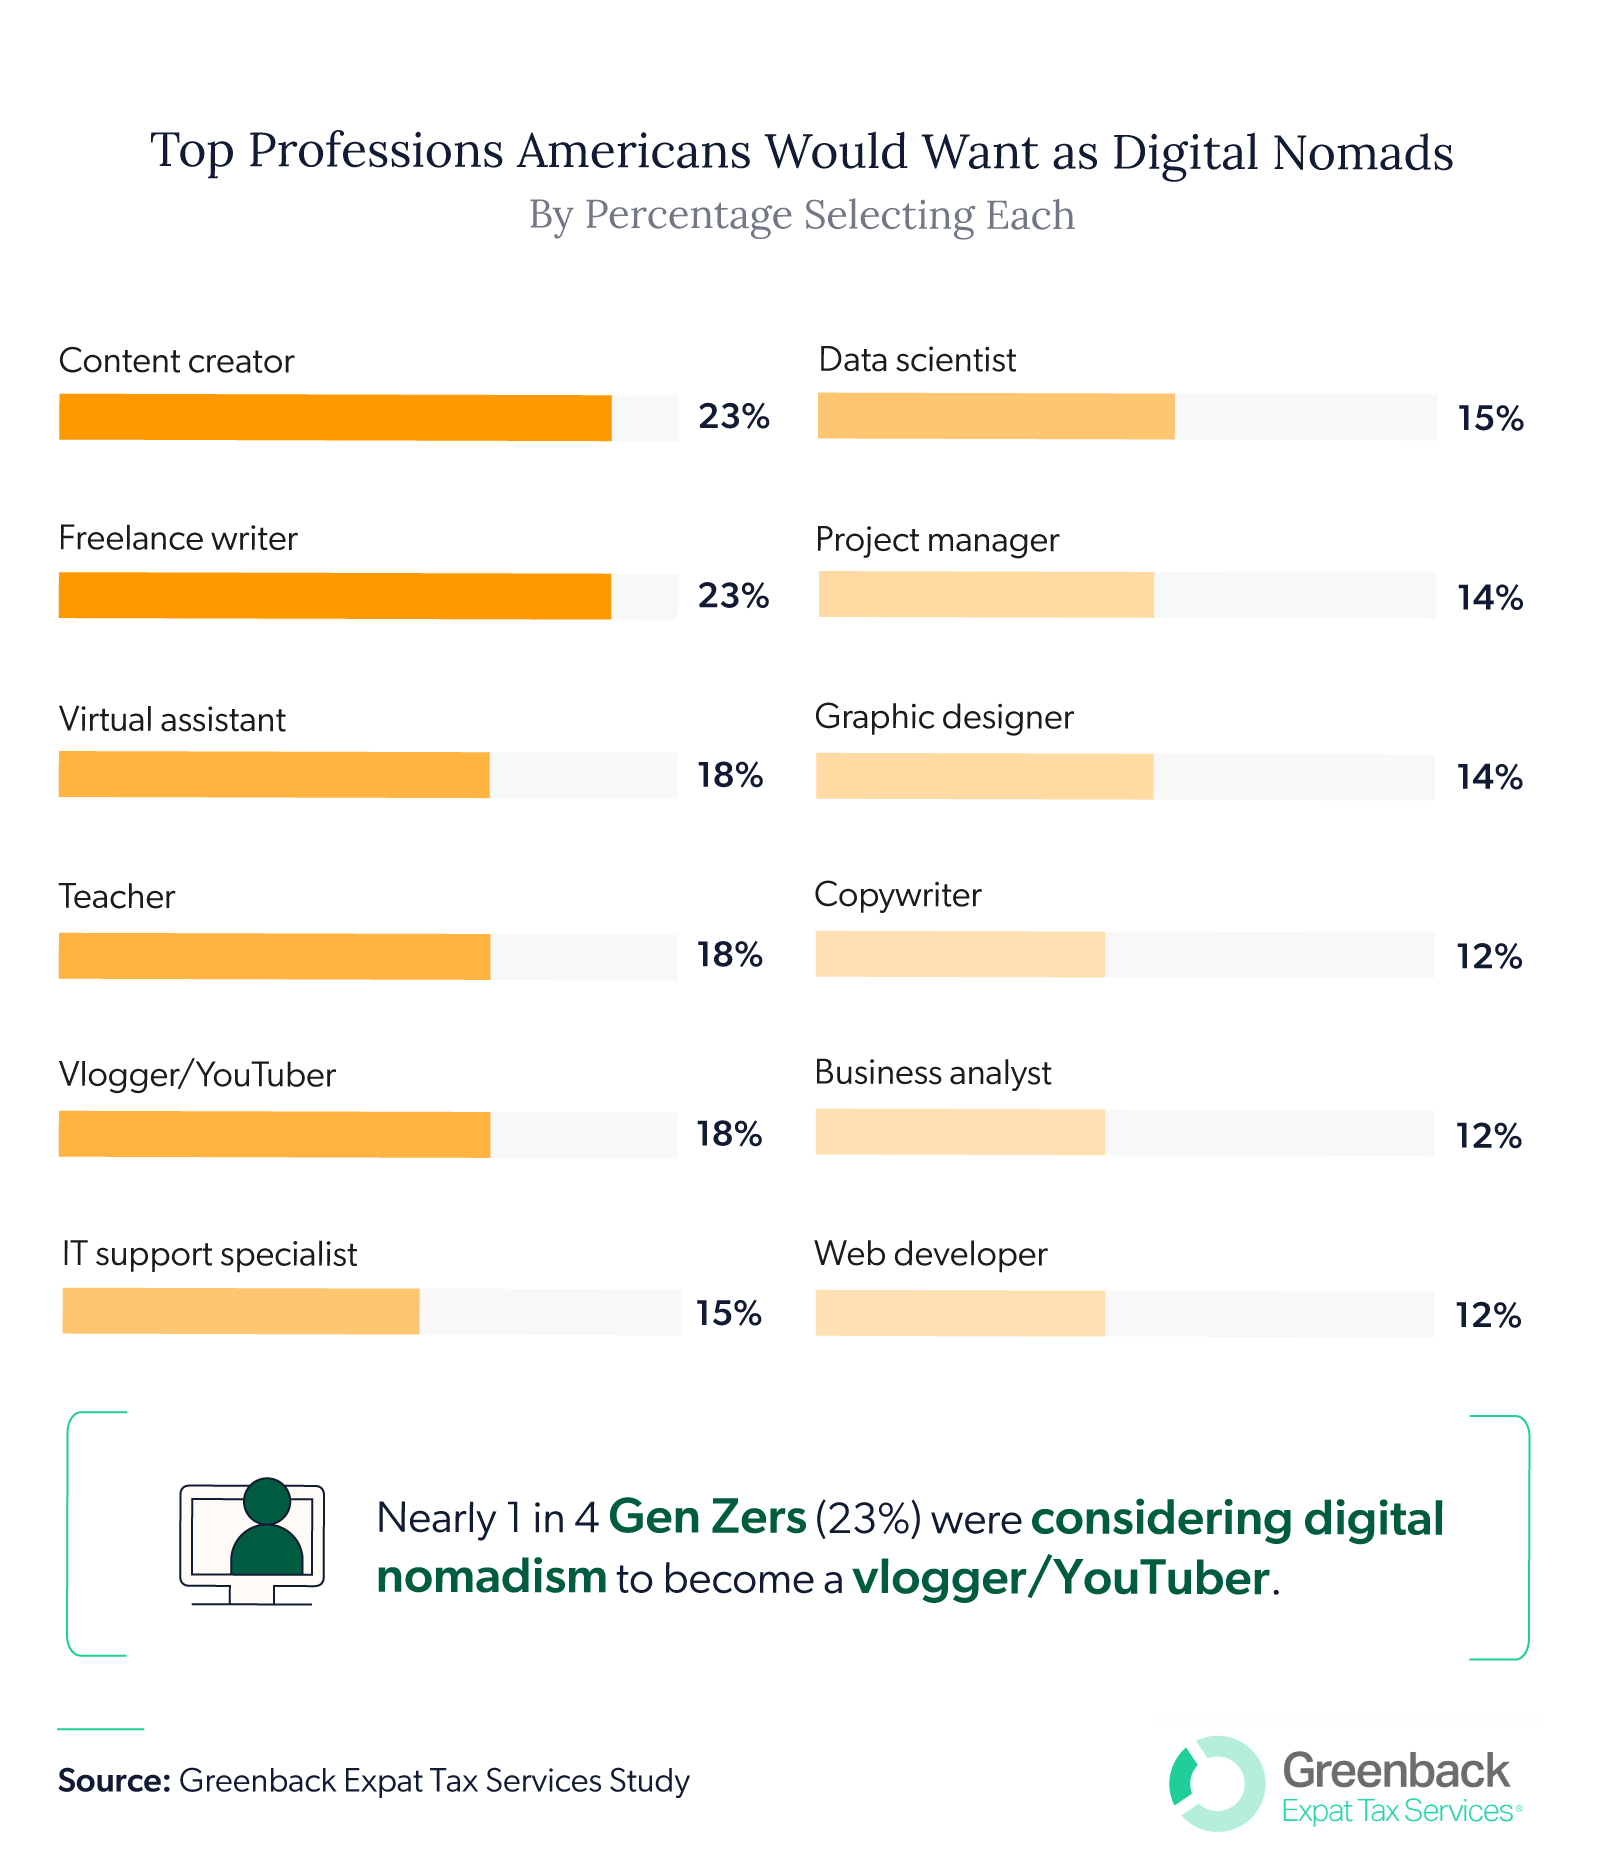 Top professions Americans want as digital nomads